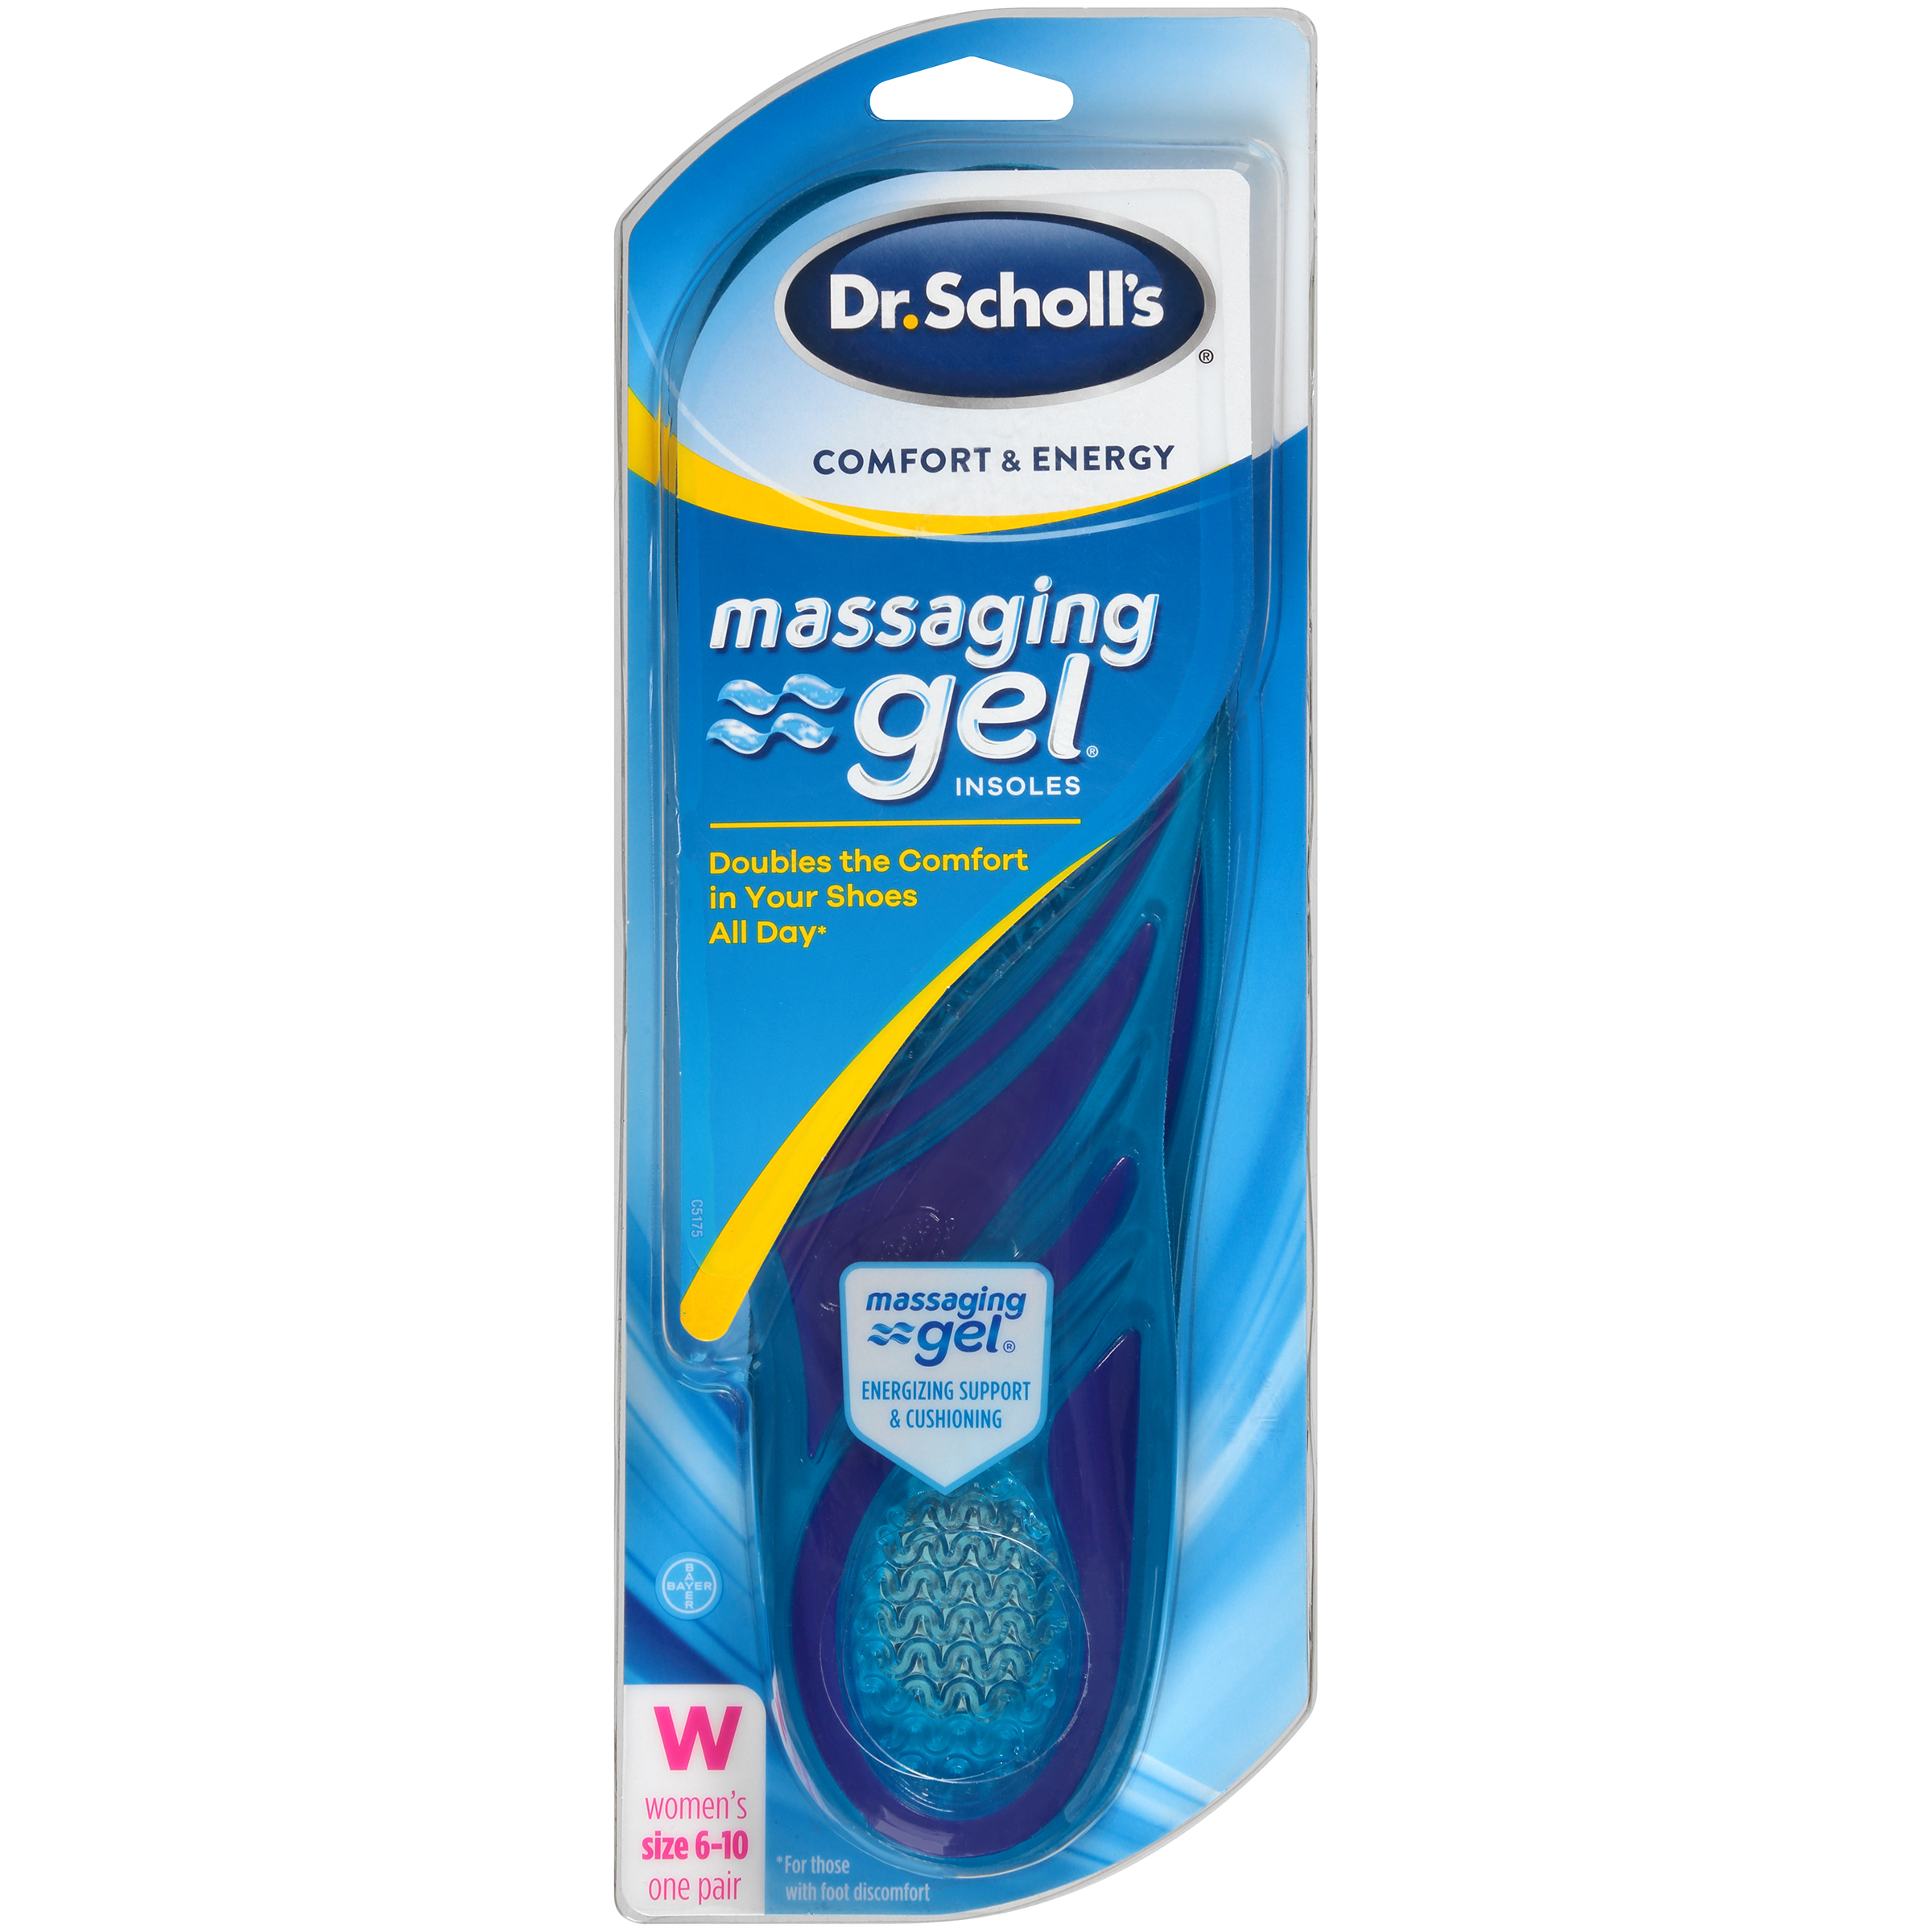 Dr. Scholl's Dr. Scholl&#8217;s Comfort and Energy Massaging Gel Insoles for Women, 1 Pair, Size 6-10